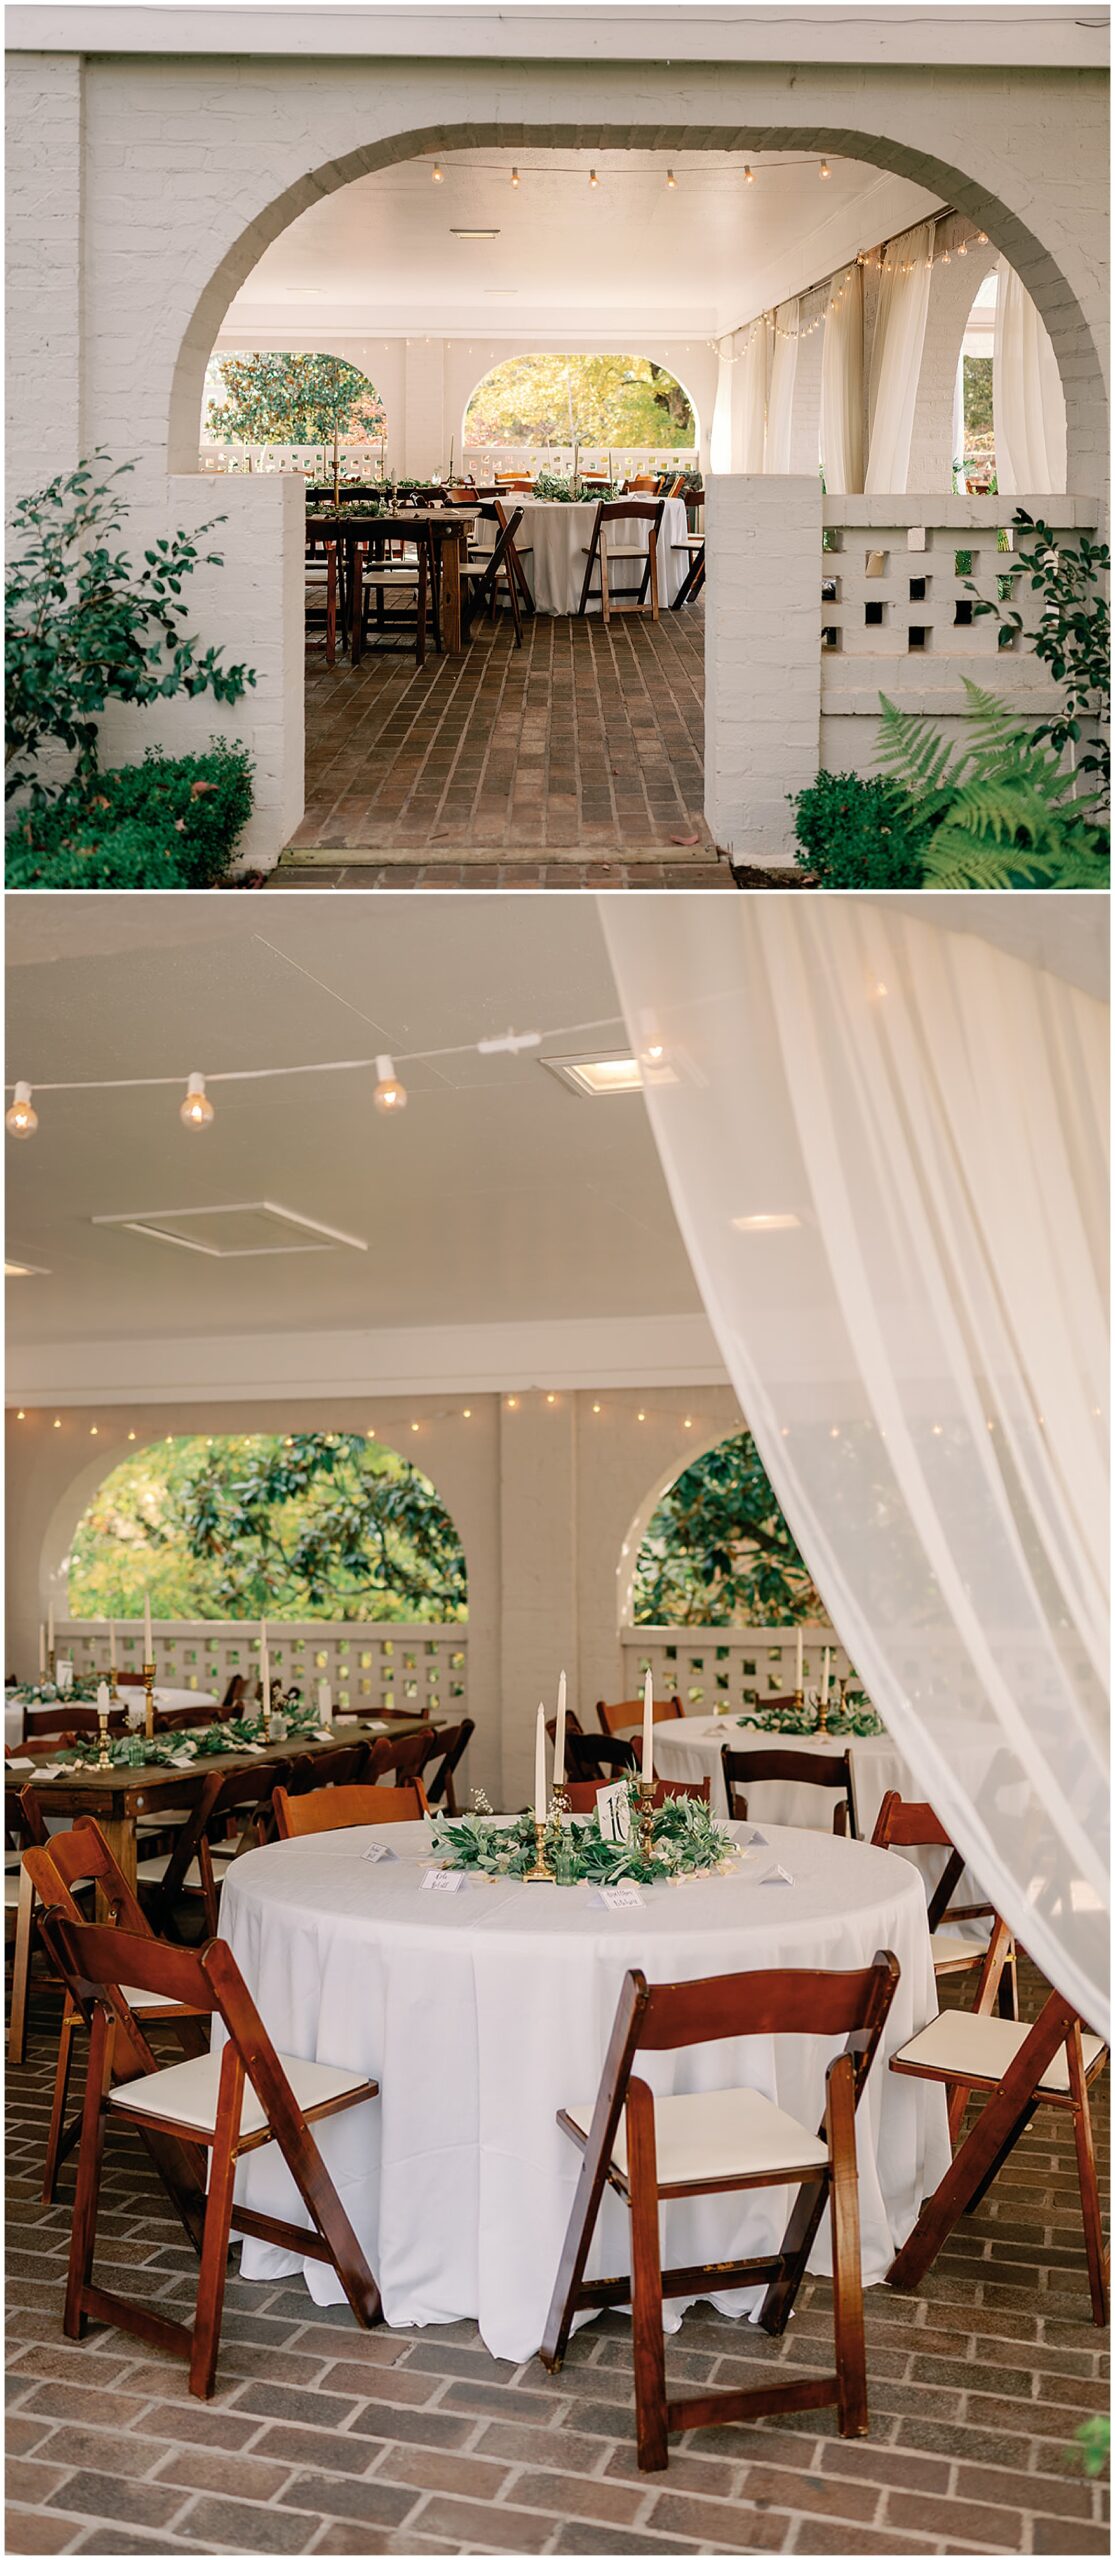 Details of the outdoor covered maple grove estate wedding reception venue with wooden chairs